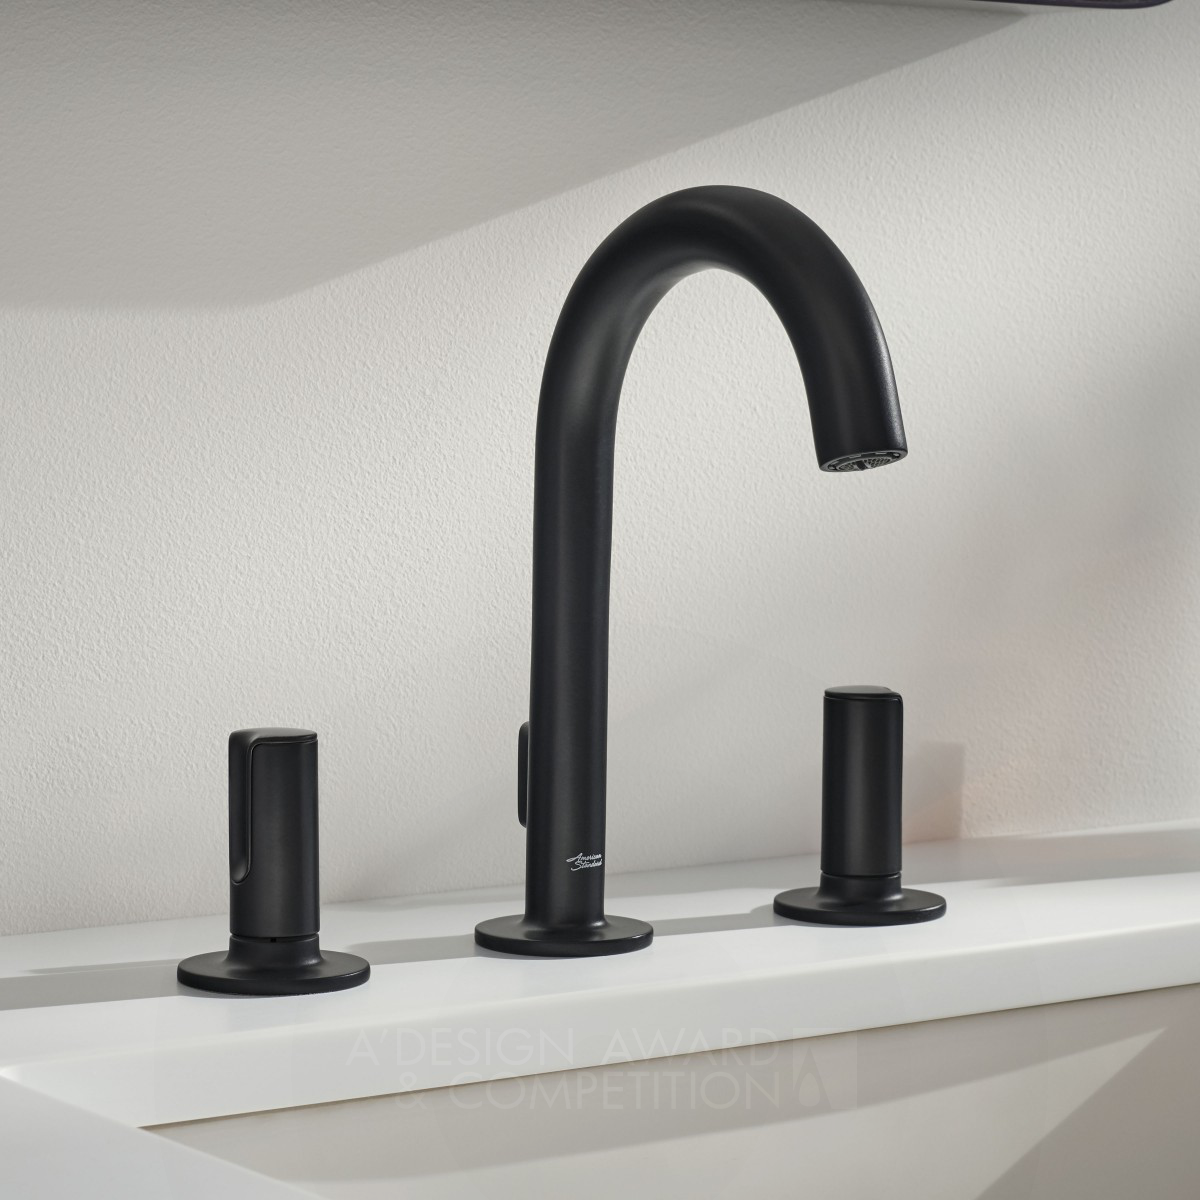 American Standard Bathroom Faucets and Accessories